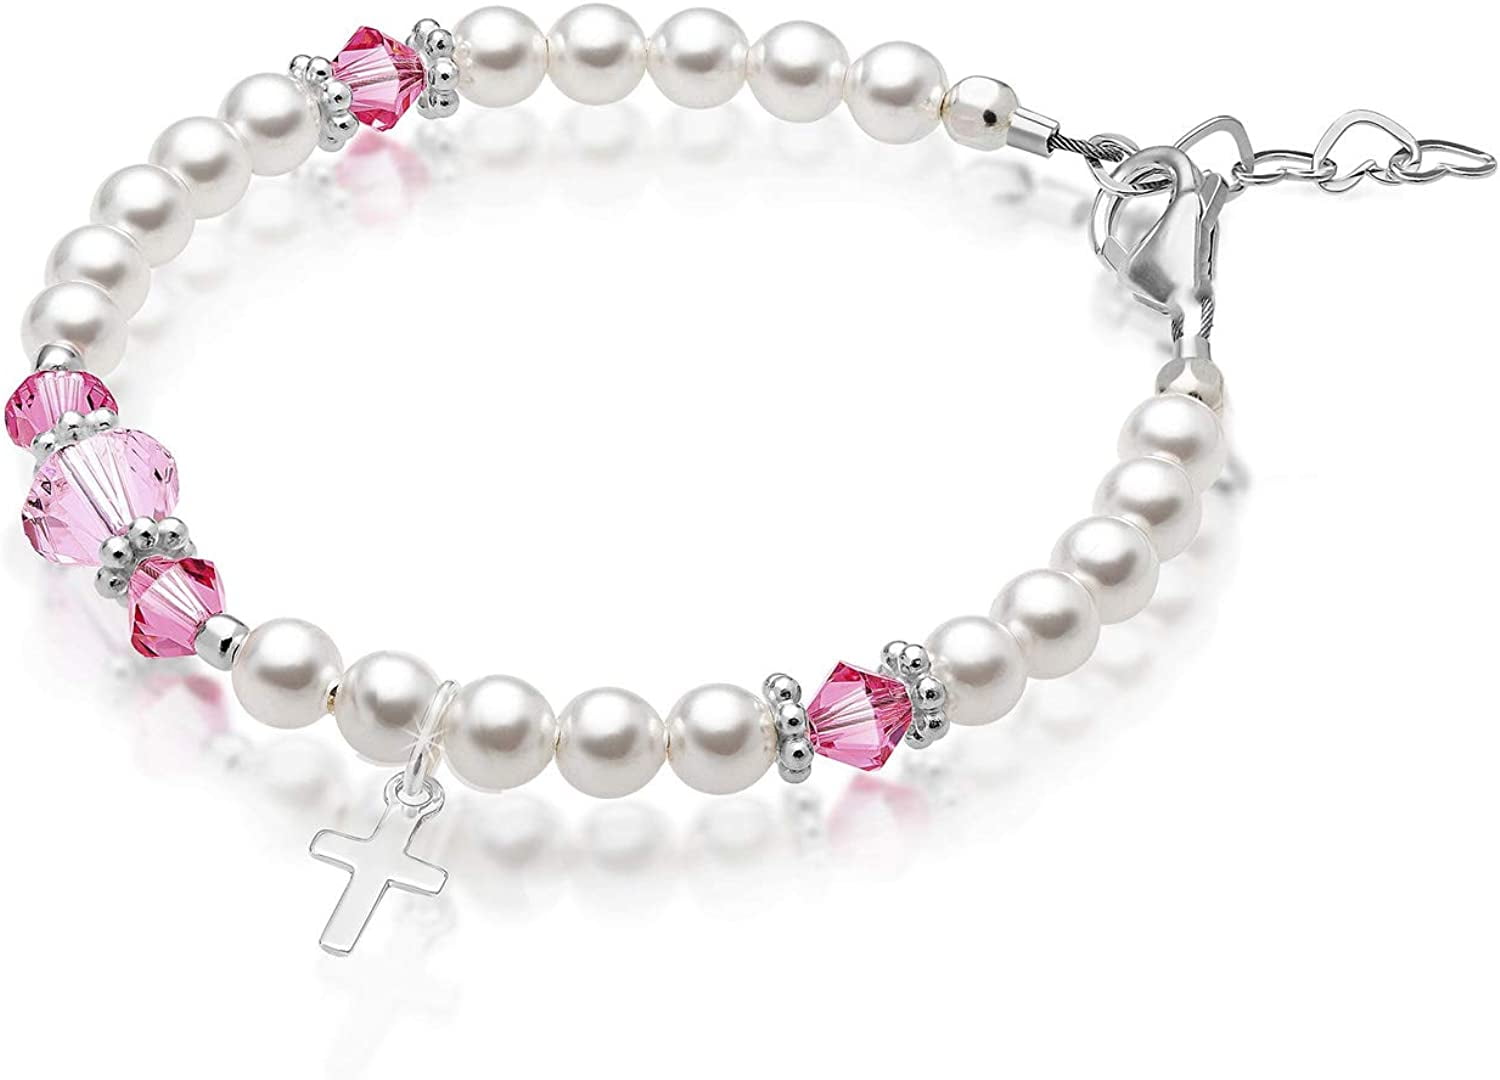 Baby Crystals Elegant Sterling Silver Cross Charm Baptism Bracelet Gifts Girl White Pink European Simulated Pearls Crystals Girls Jewelry Bracelets 7aa32e14 b398 432d 9101 a4d9eadd46bc.d509da8a4b978aea6c1642c22d4f06f2